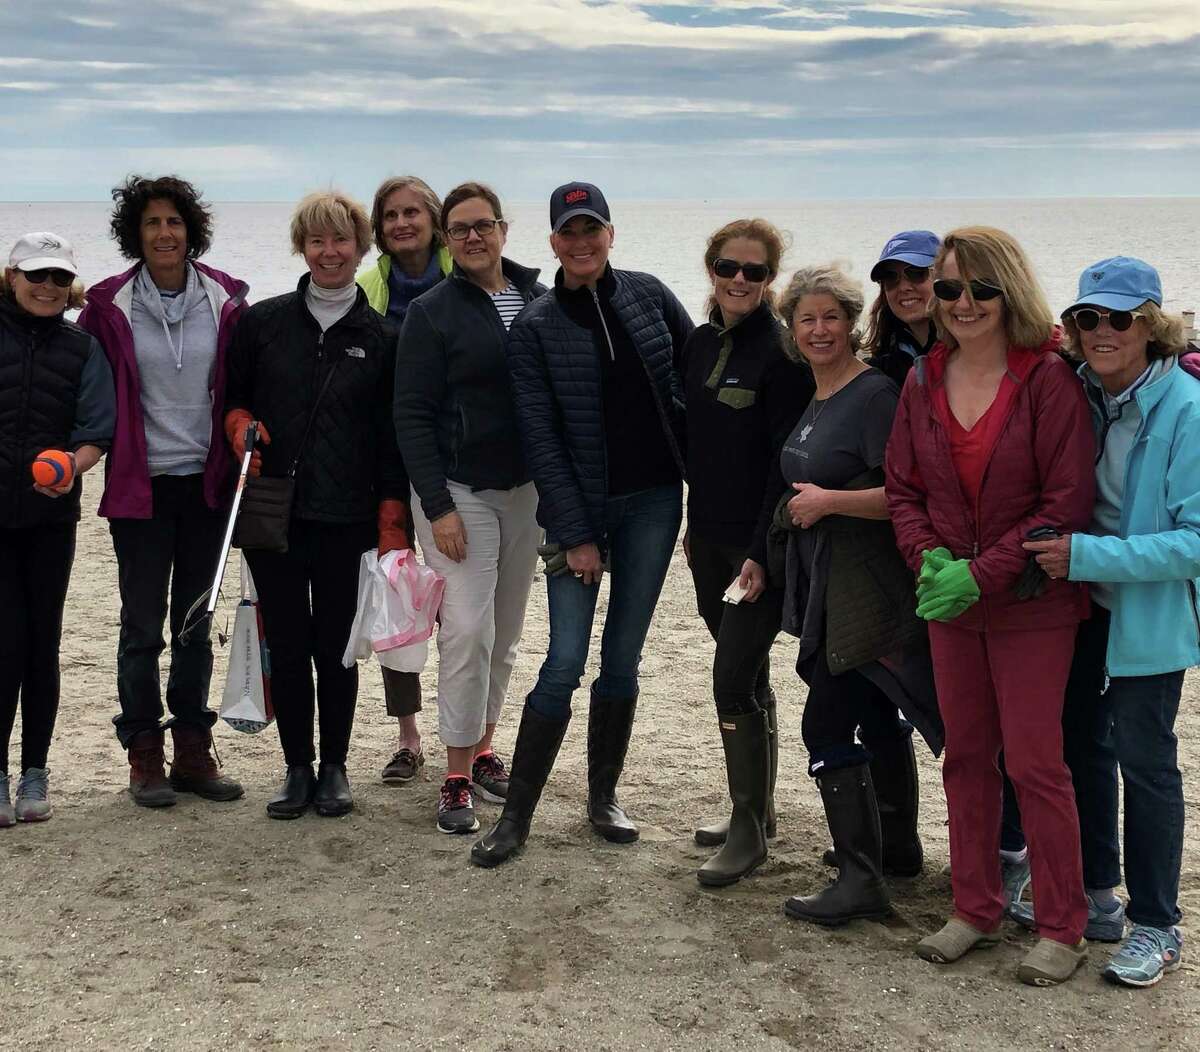 The clean-up crew, from left, Virginia Dean, Lorraine Indiveri, Nan Nelson, Sue Wittekind, Claire Van de Berghe, Olivia Charney, Jen Bargas, Whitney Vose, Candace Wagner, Barbara Wooten, Penny Ross. Not pictured, Carolyn Stubbs.